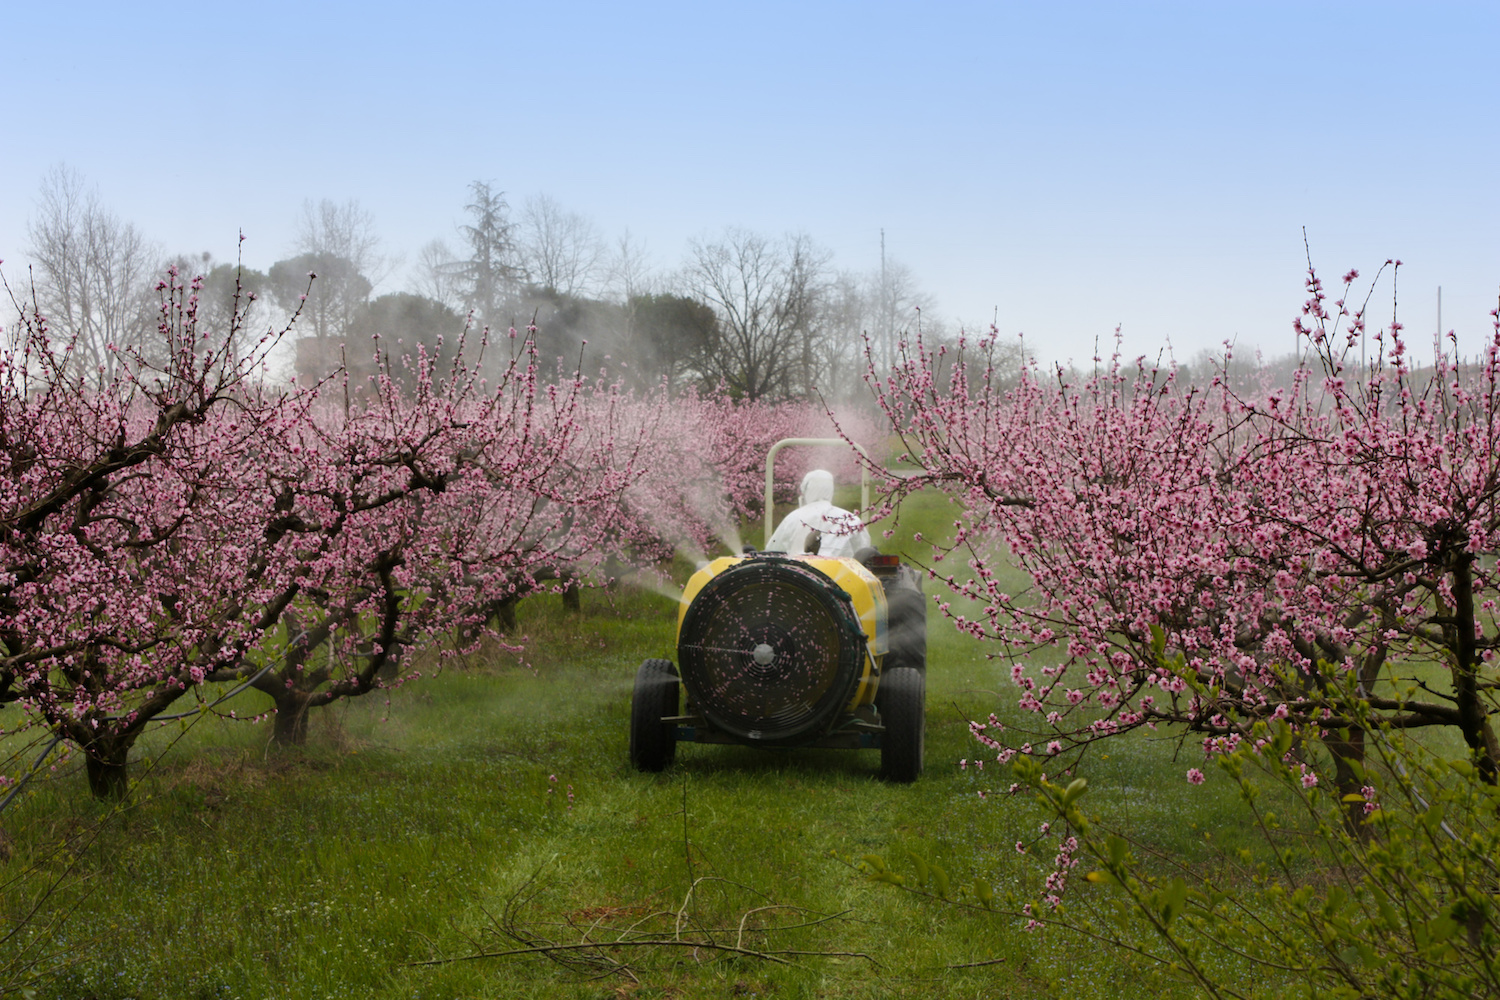 Vehicle Spraying Orchard in Bloom